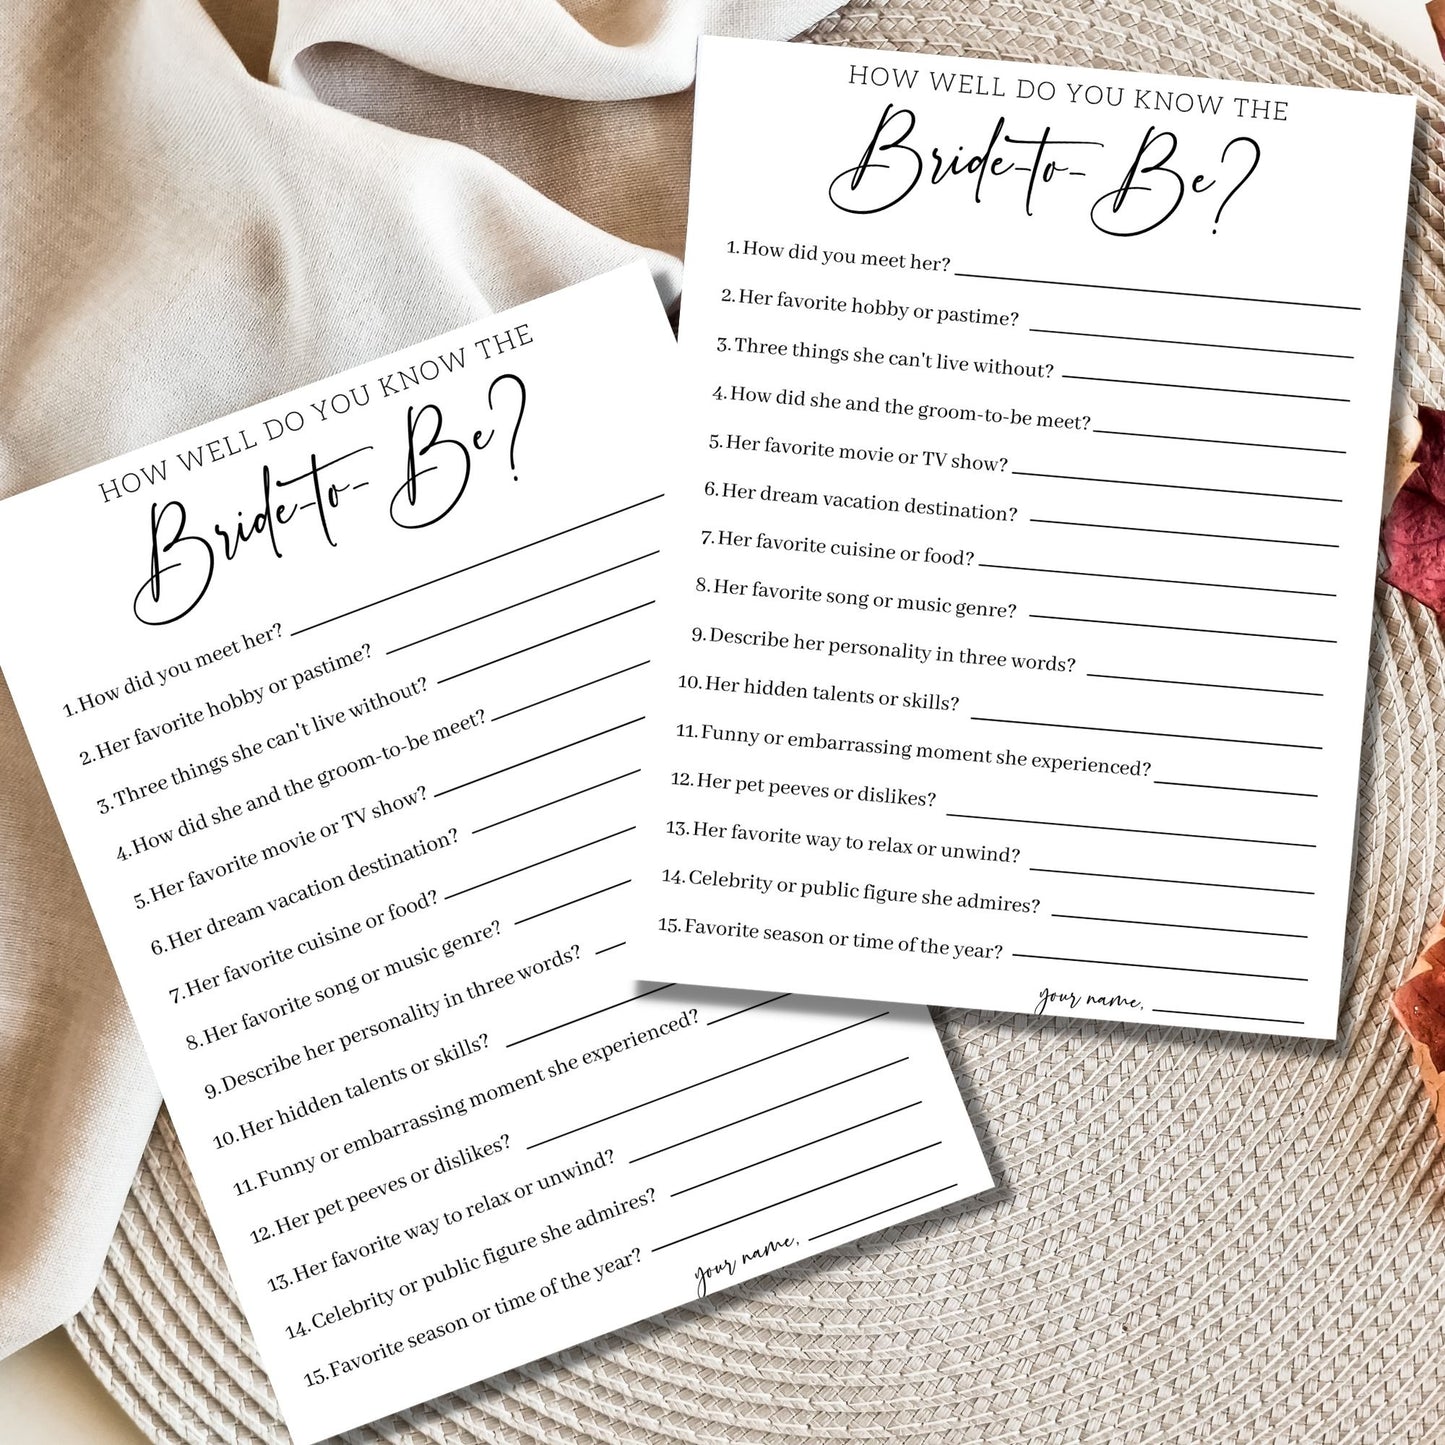 How Well Do You Know the Bride-to-Be Printable Game